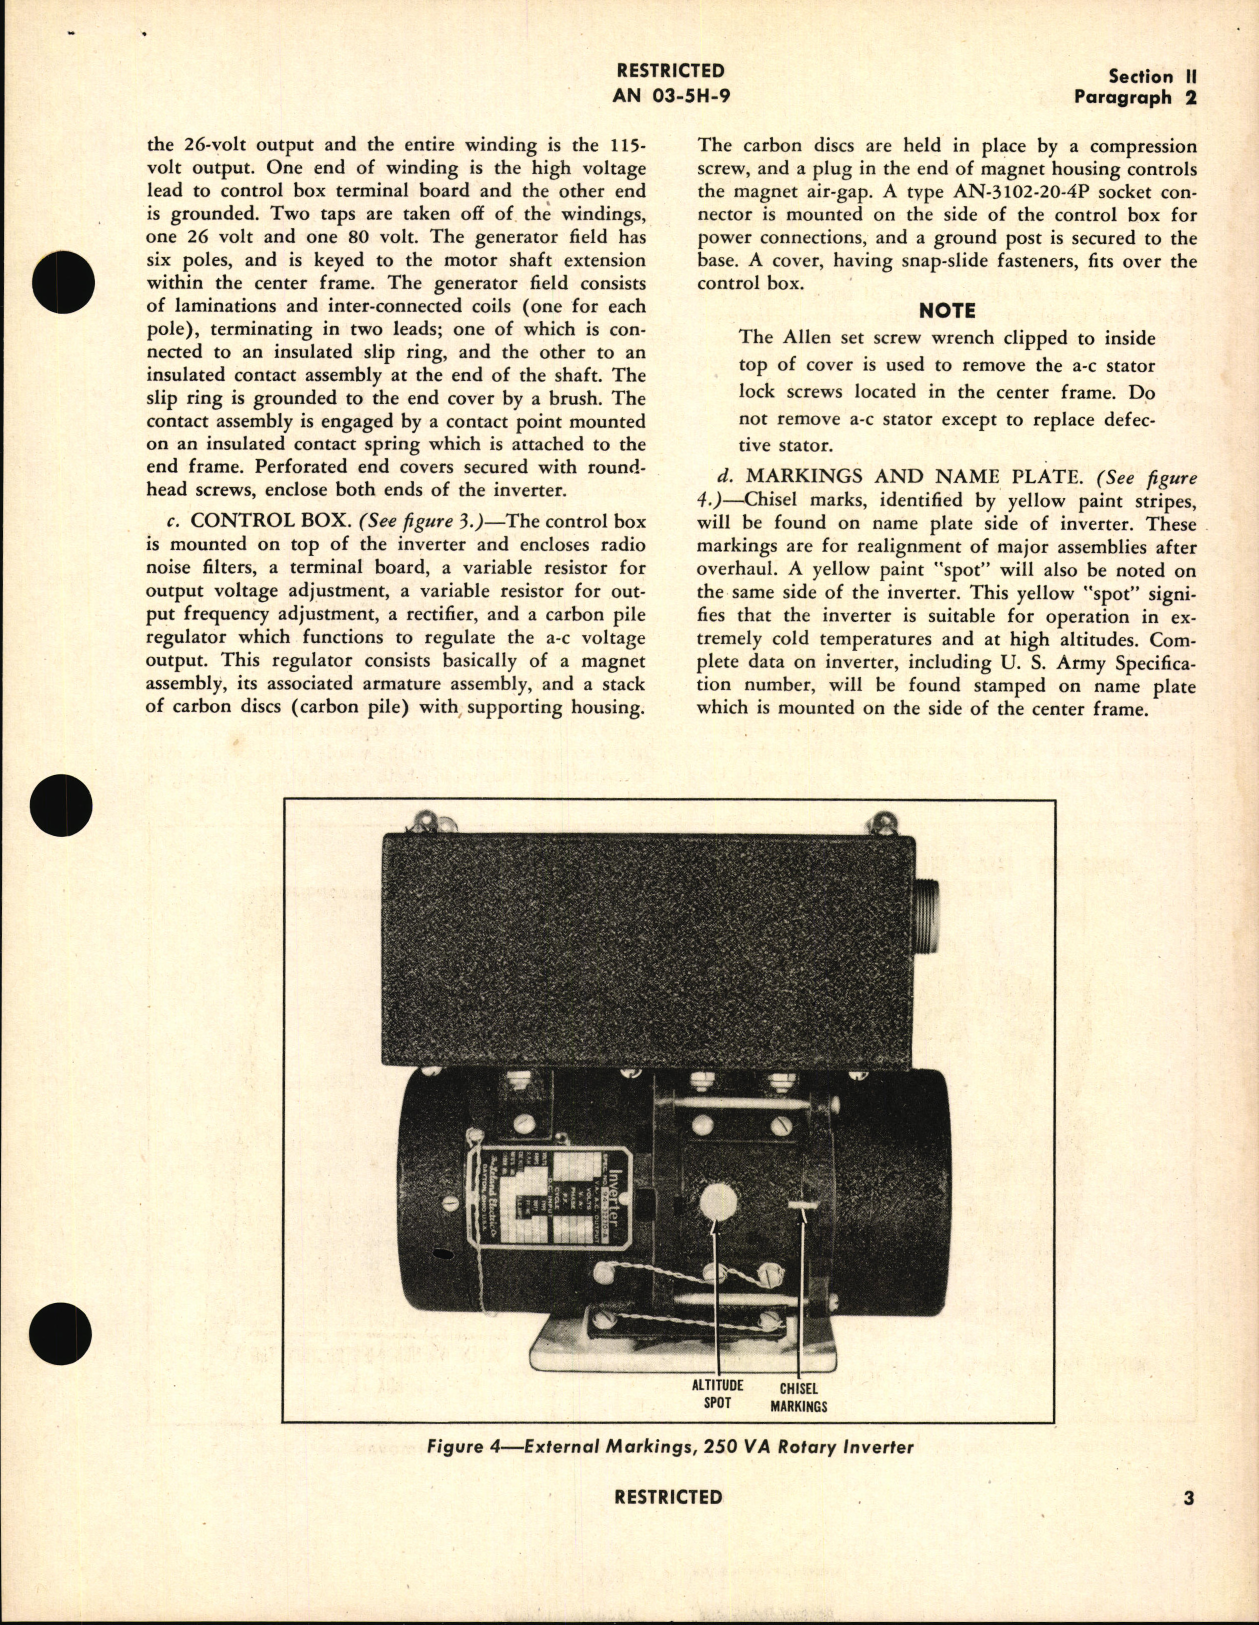 Sample page 7 from AirCorps Library document: Handbook of Instructions with Parts Catalog for 250 VA Rotary Inverter